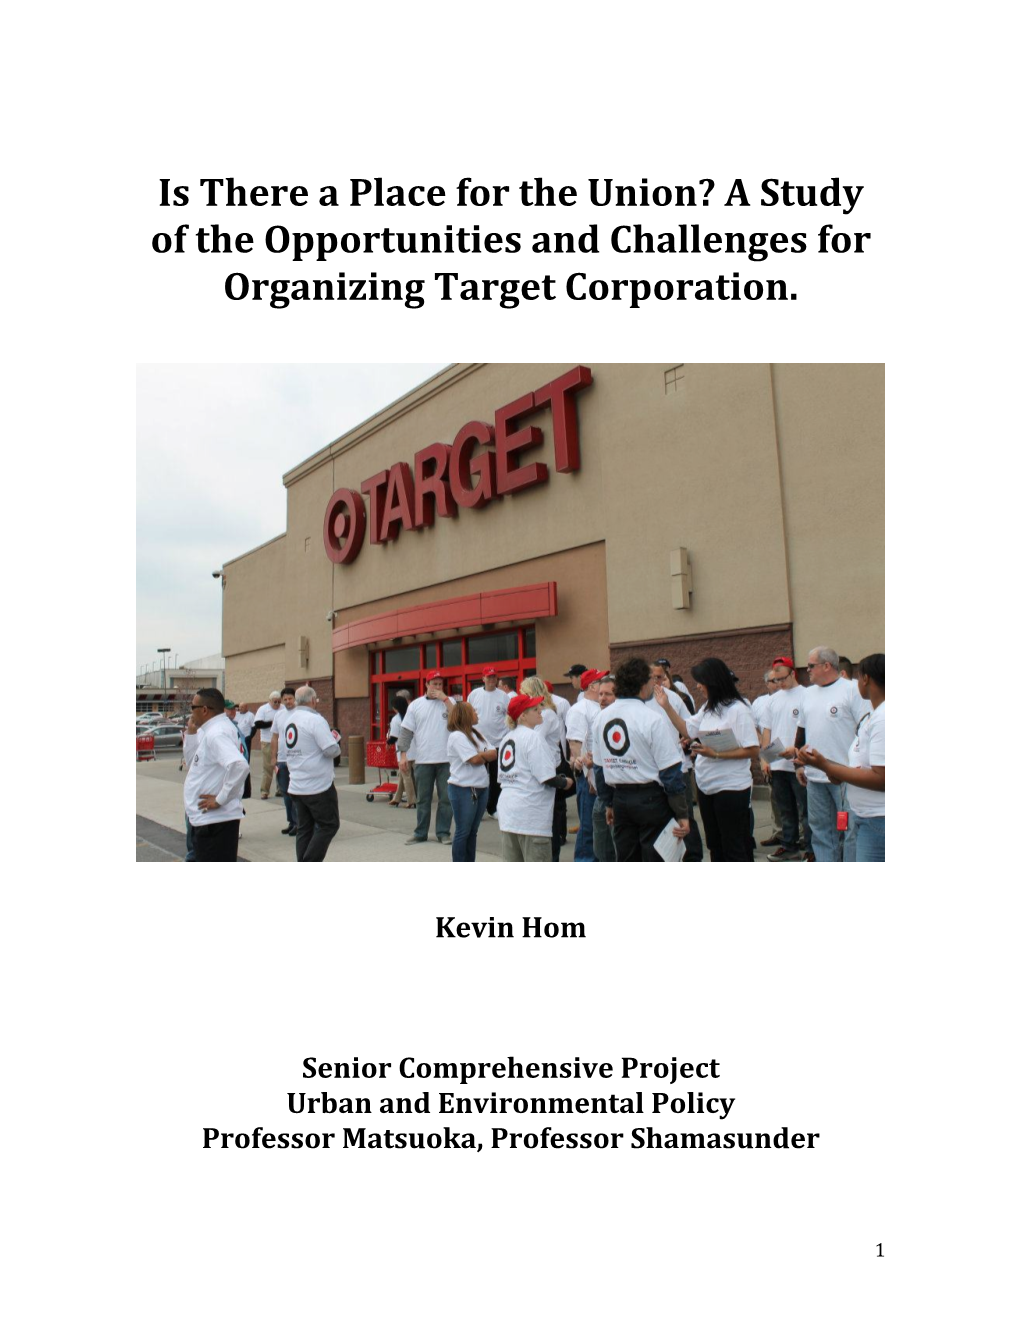 Is There a Place for the Union? a Study of the Opportunities and Challenges for Organizing Target Corporation